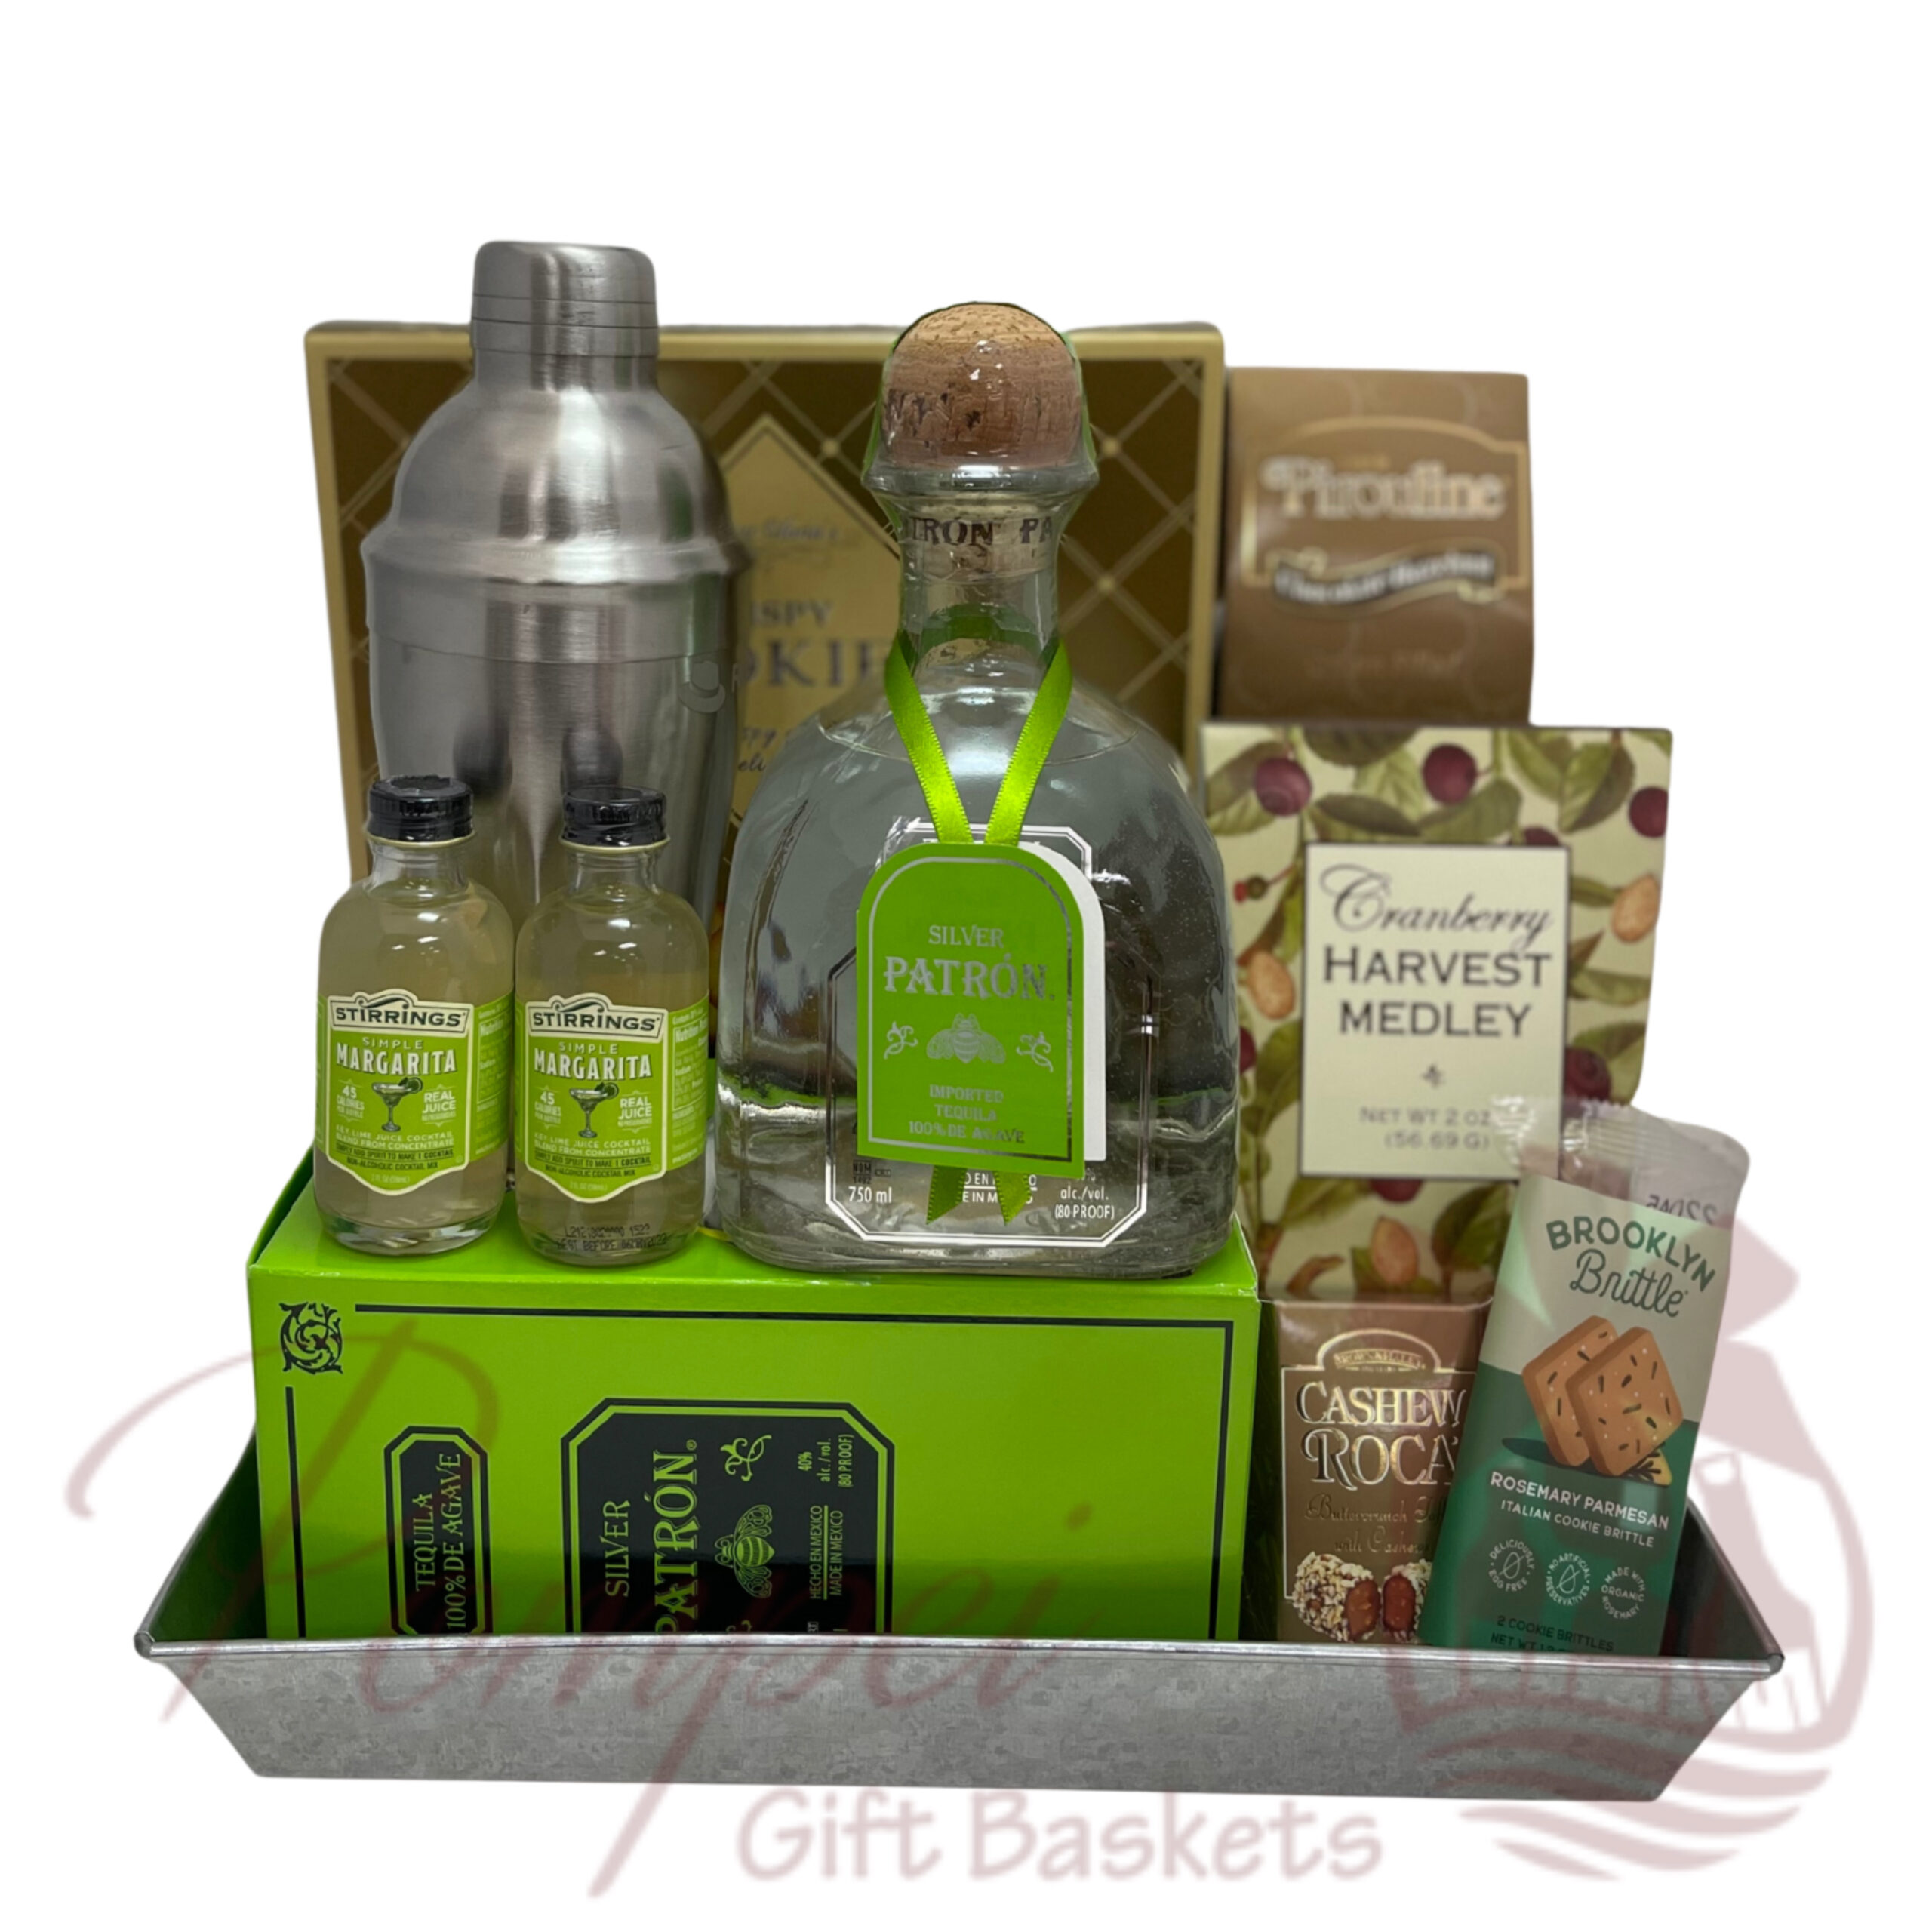 Sparkling Wine And Snacks - Anniversary Gift Baskets For Couples